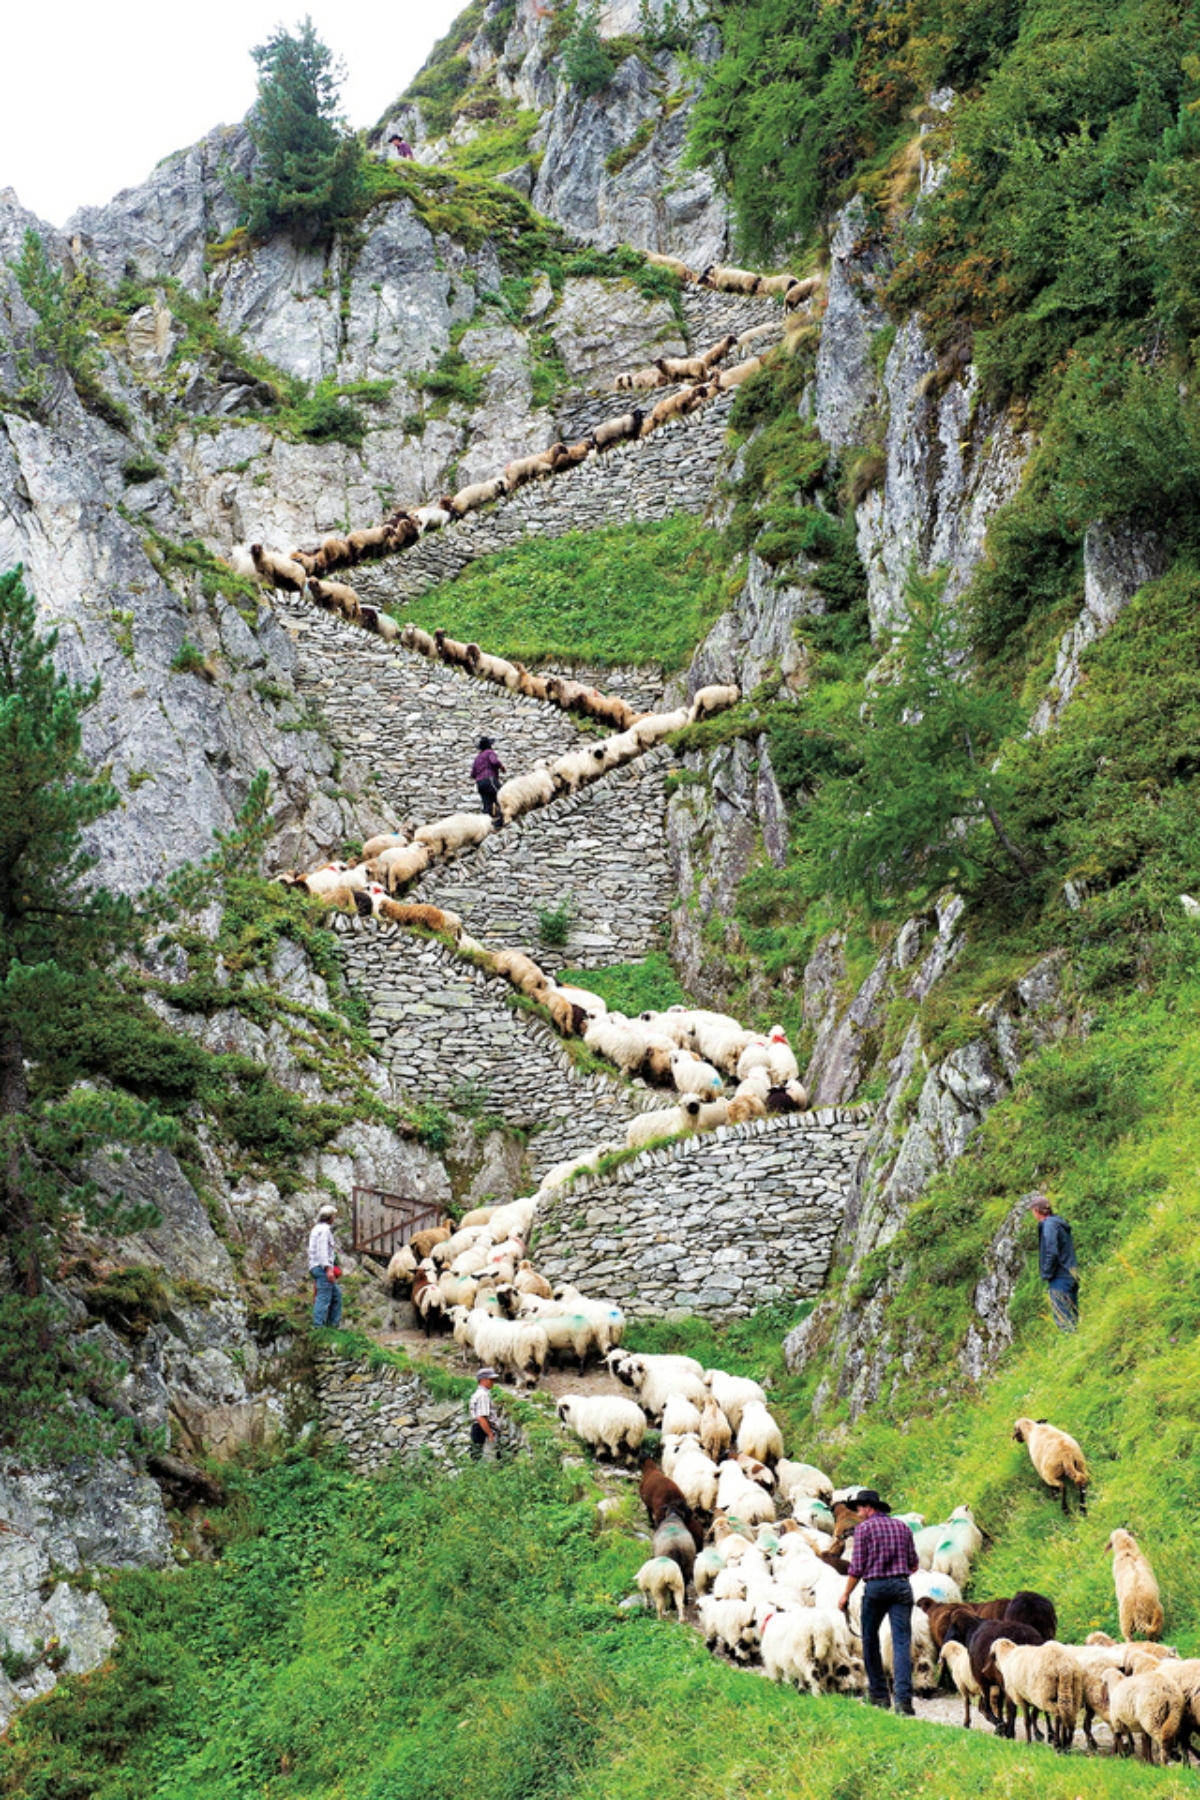 Switzerland Shepherd's Weekend In this picture taken Aug. 25, 2012, a flock of alpine sheep walk on a cliff path on the way from summer grazing high above the Aletschgletscher glacier down to Belalp in the canton of Valais, during the "Schaeferwochenende" (Shepherd's Weekend) in Belalp near Blatten, Switzerland. (AP Photo/Keystone/Jean-Christophe Bott)